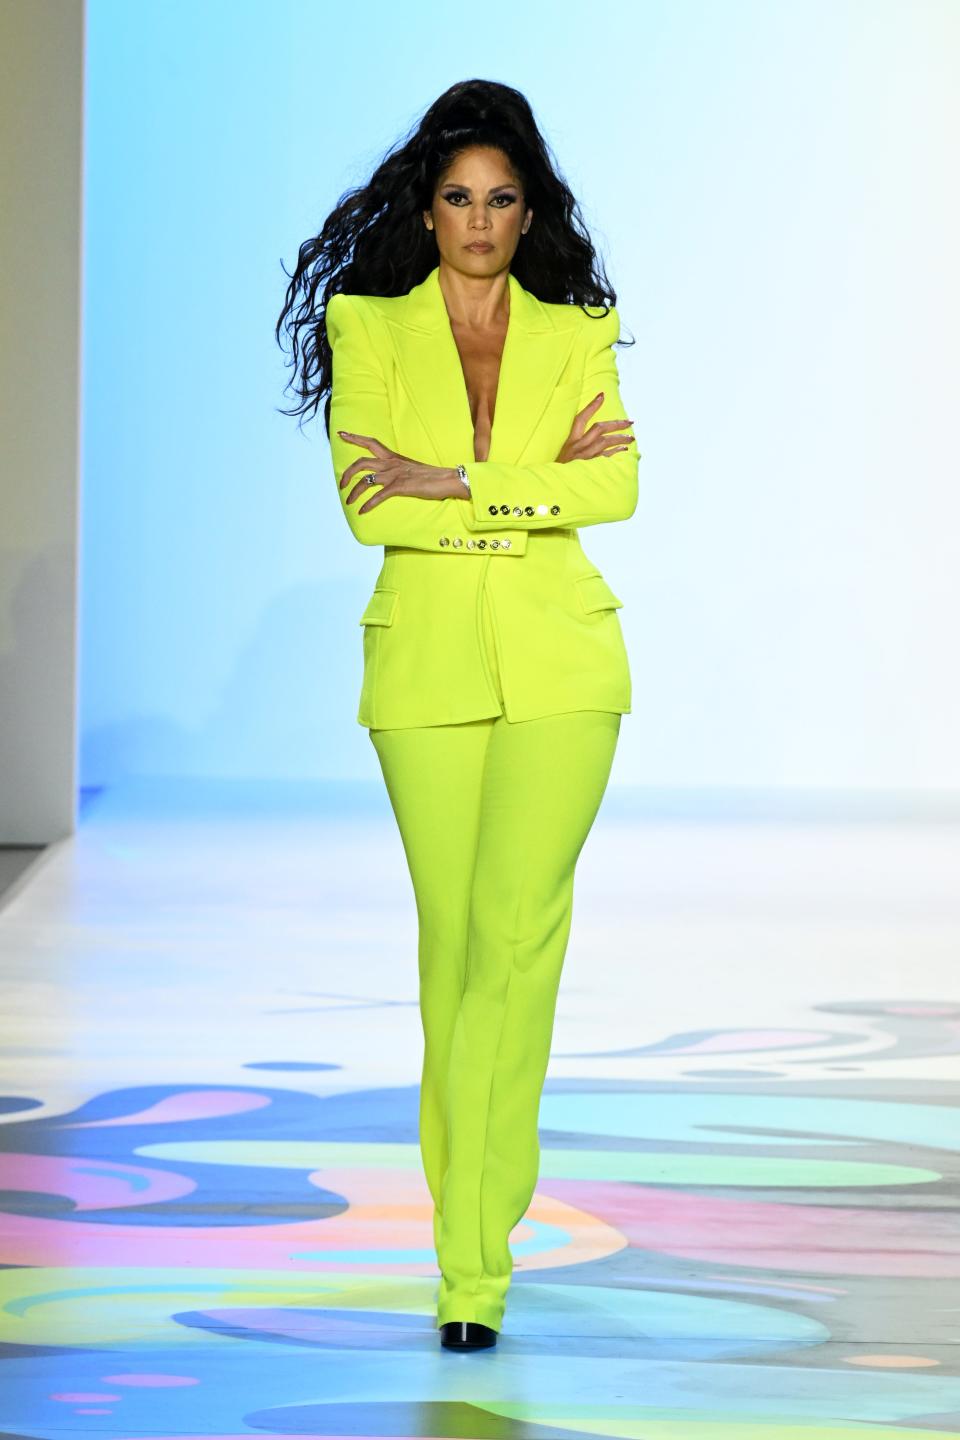 Veronica Webb walks in the Sergio Hudson show during New York Fashion Week on Feb. 11, 2023. u0022In my show, you'll see everyone from the 22-year-old model up to the 57-year-old Veronica Webb,u0022 Hudson says.